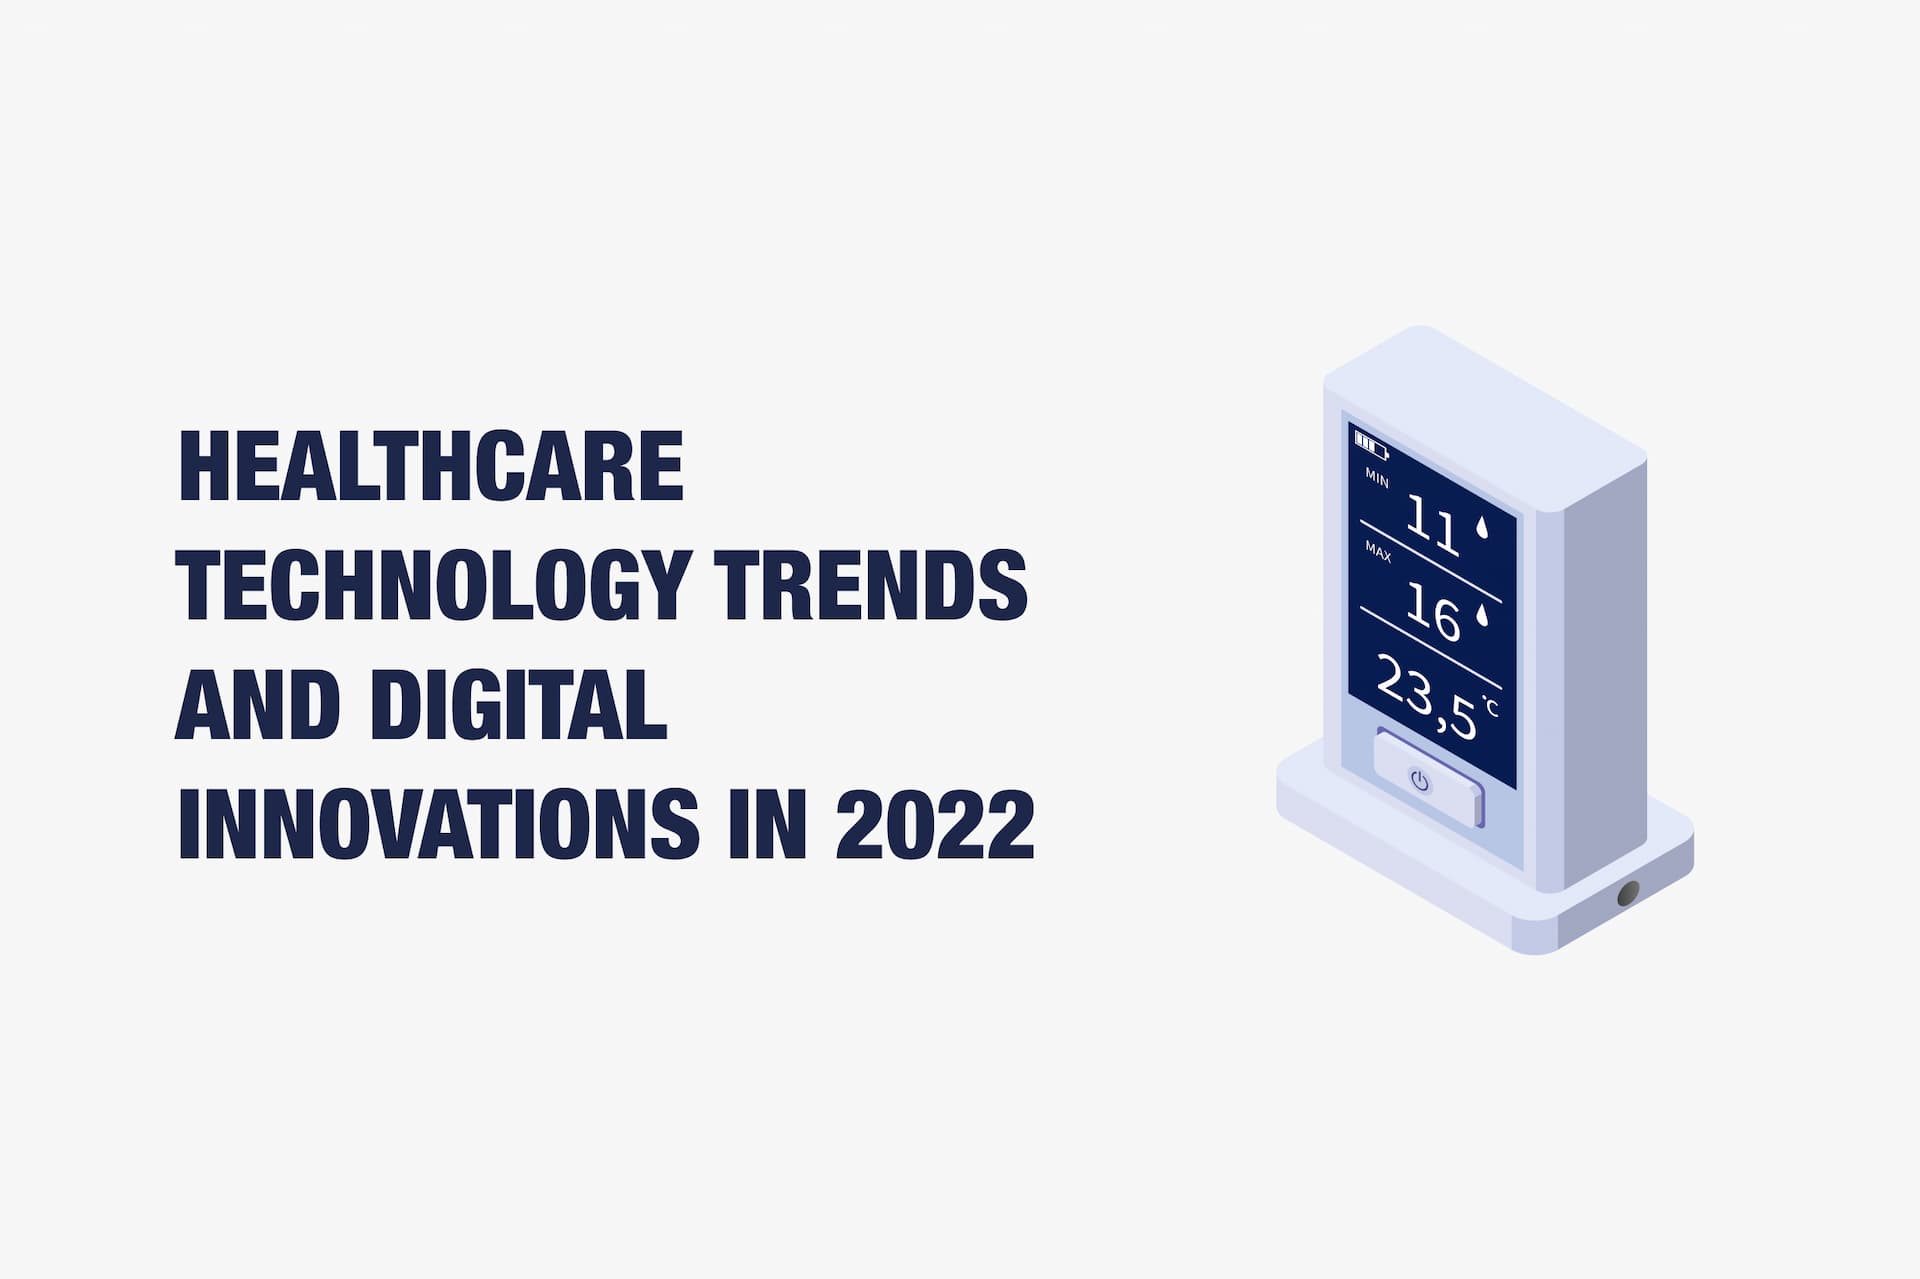 Healthcare Technology Trends and Digital Innovations in 2022